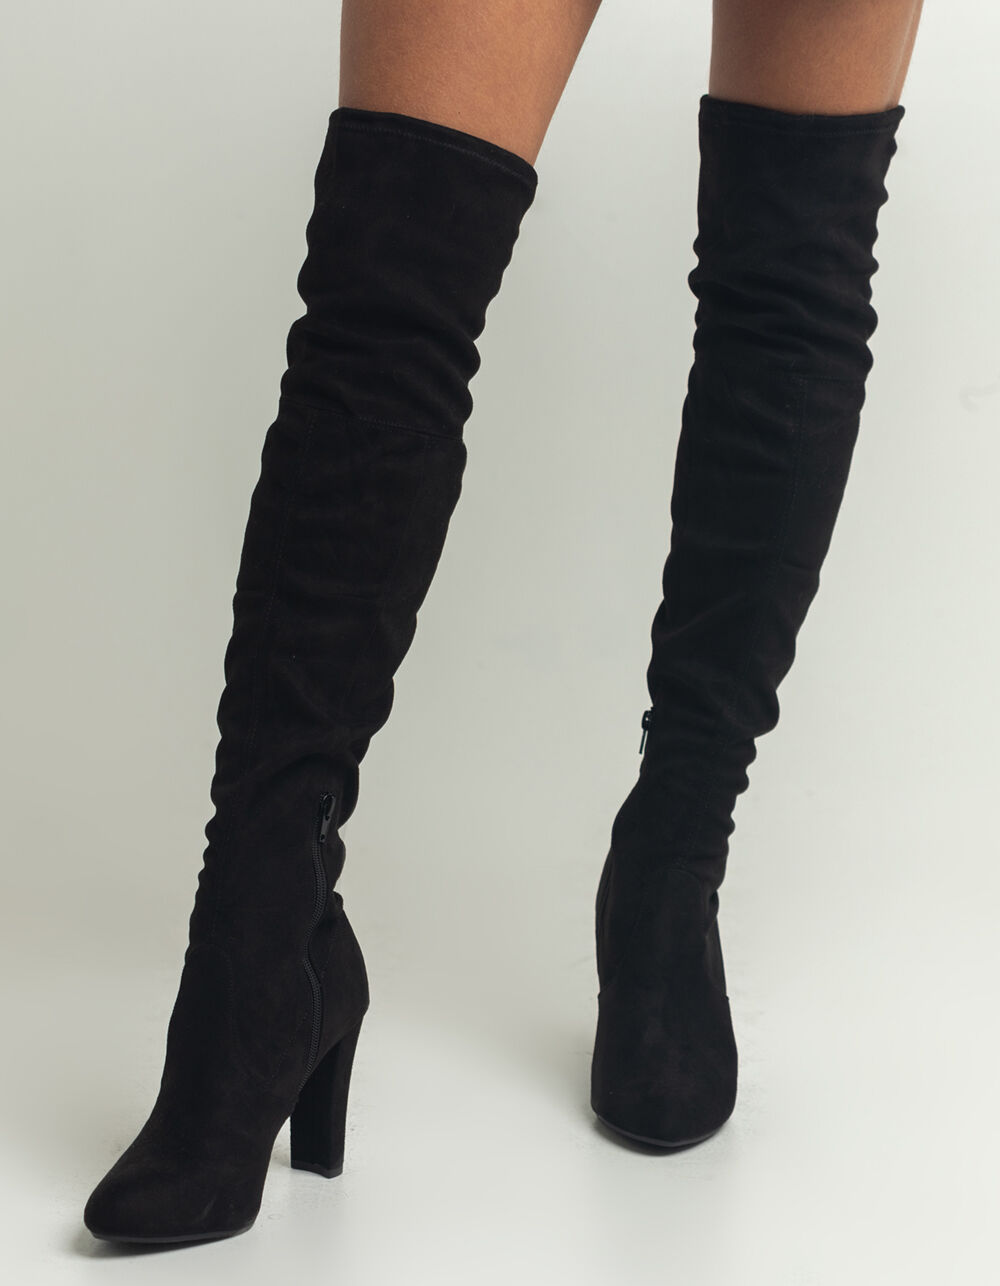 SODA Over The Knee Womens Heeled Boot - BLACK | Tillys